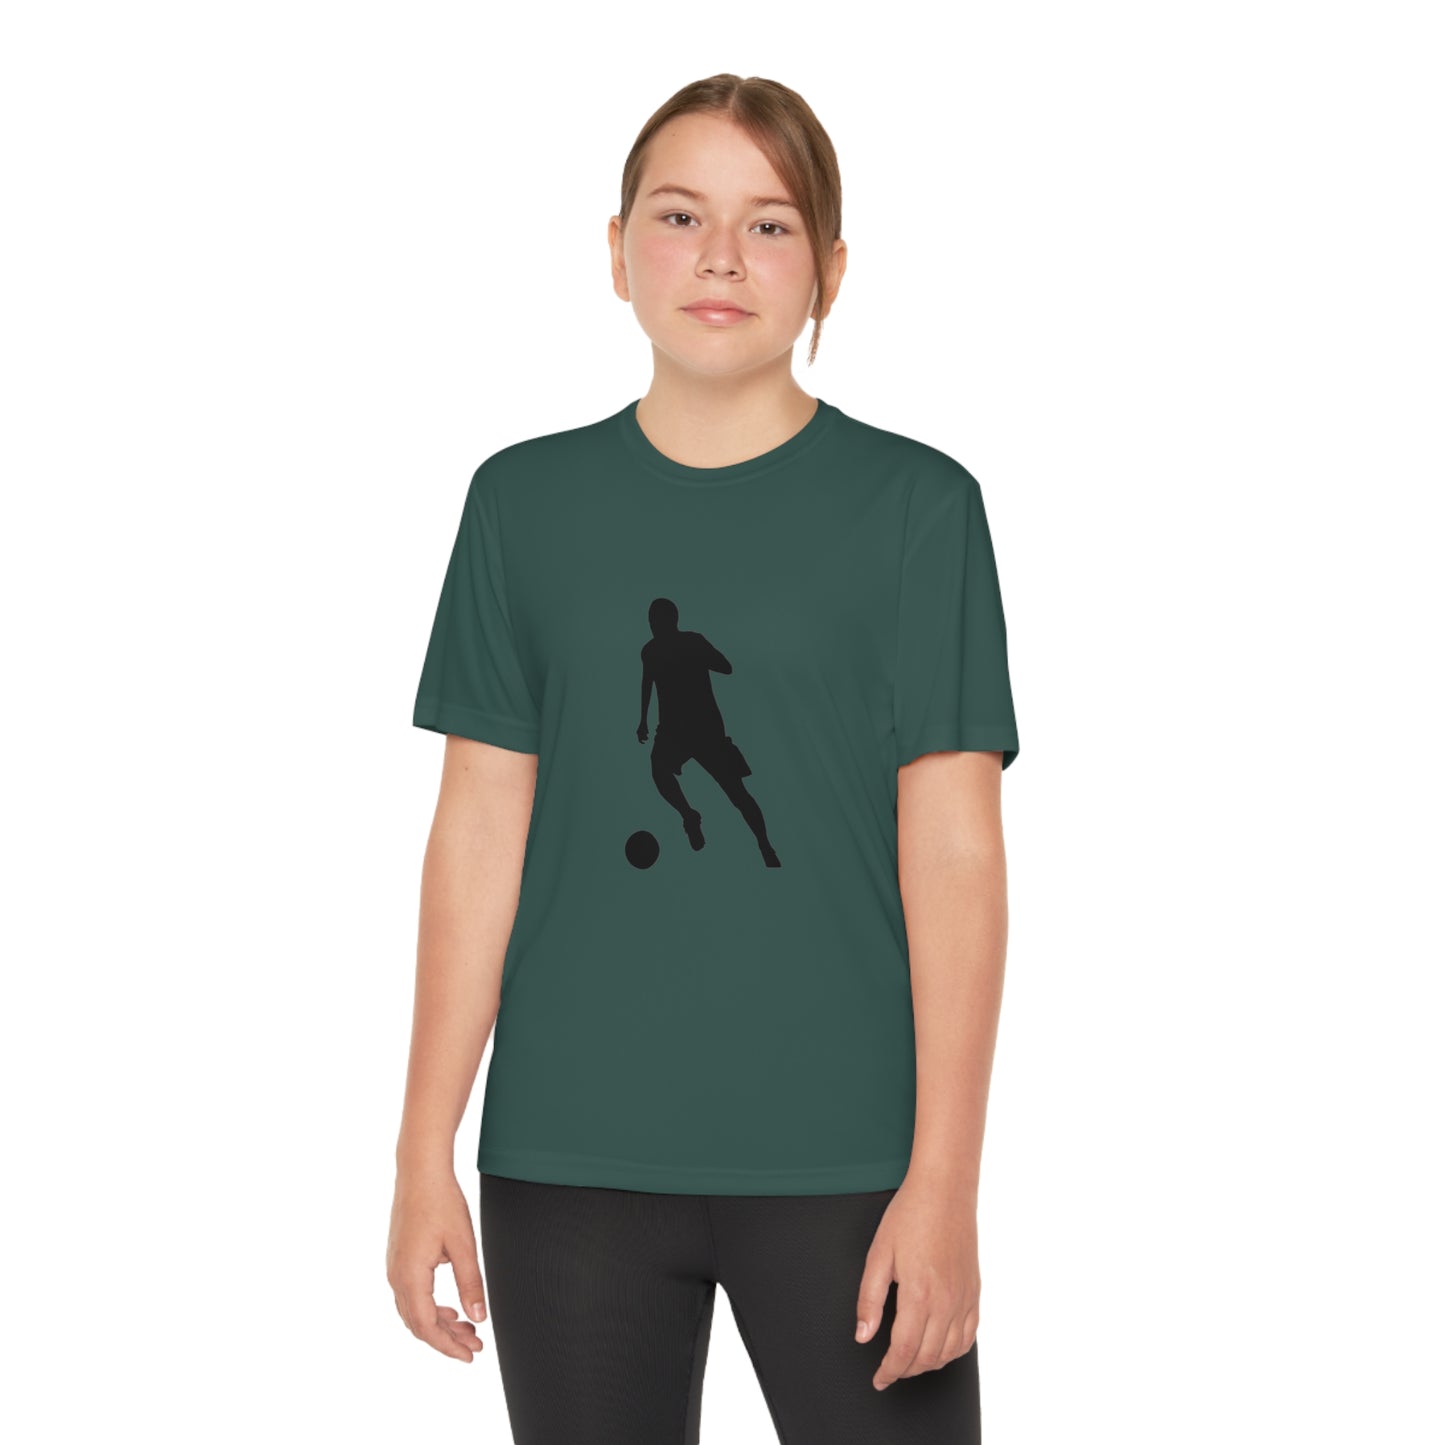 Youth Competitor Tee #1: Soccer